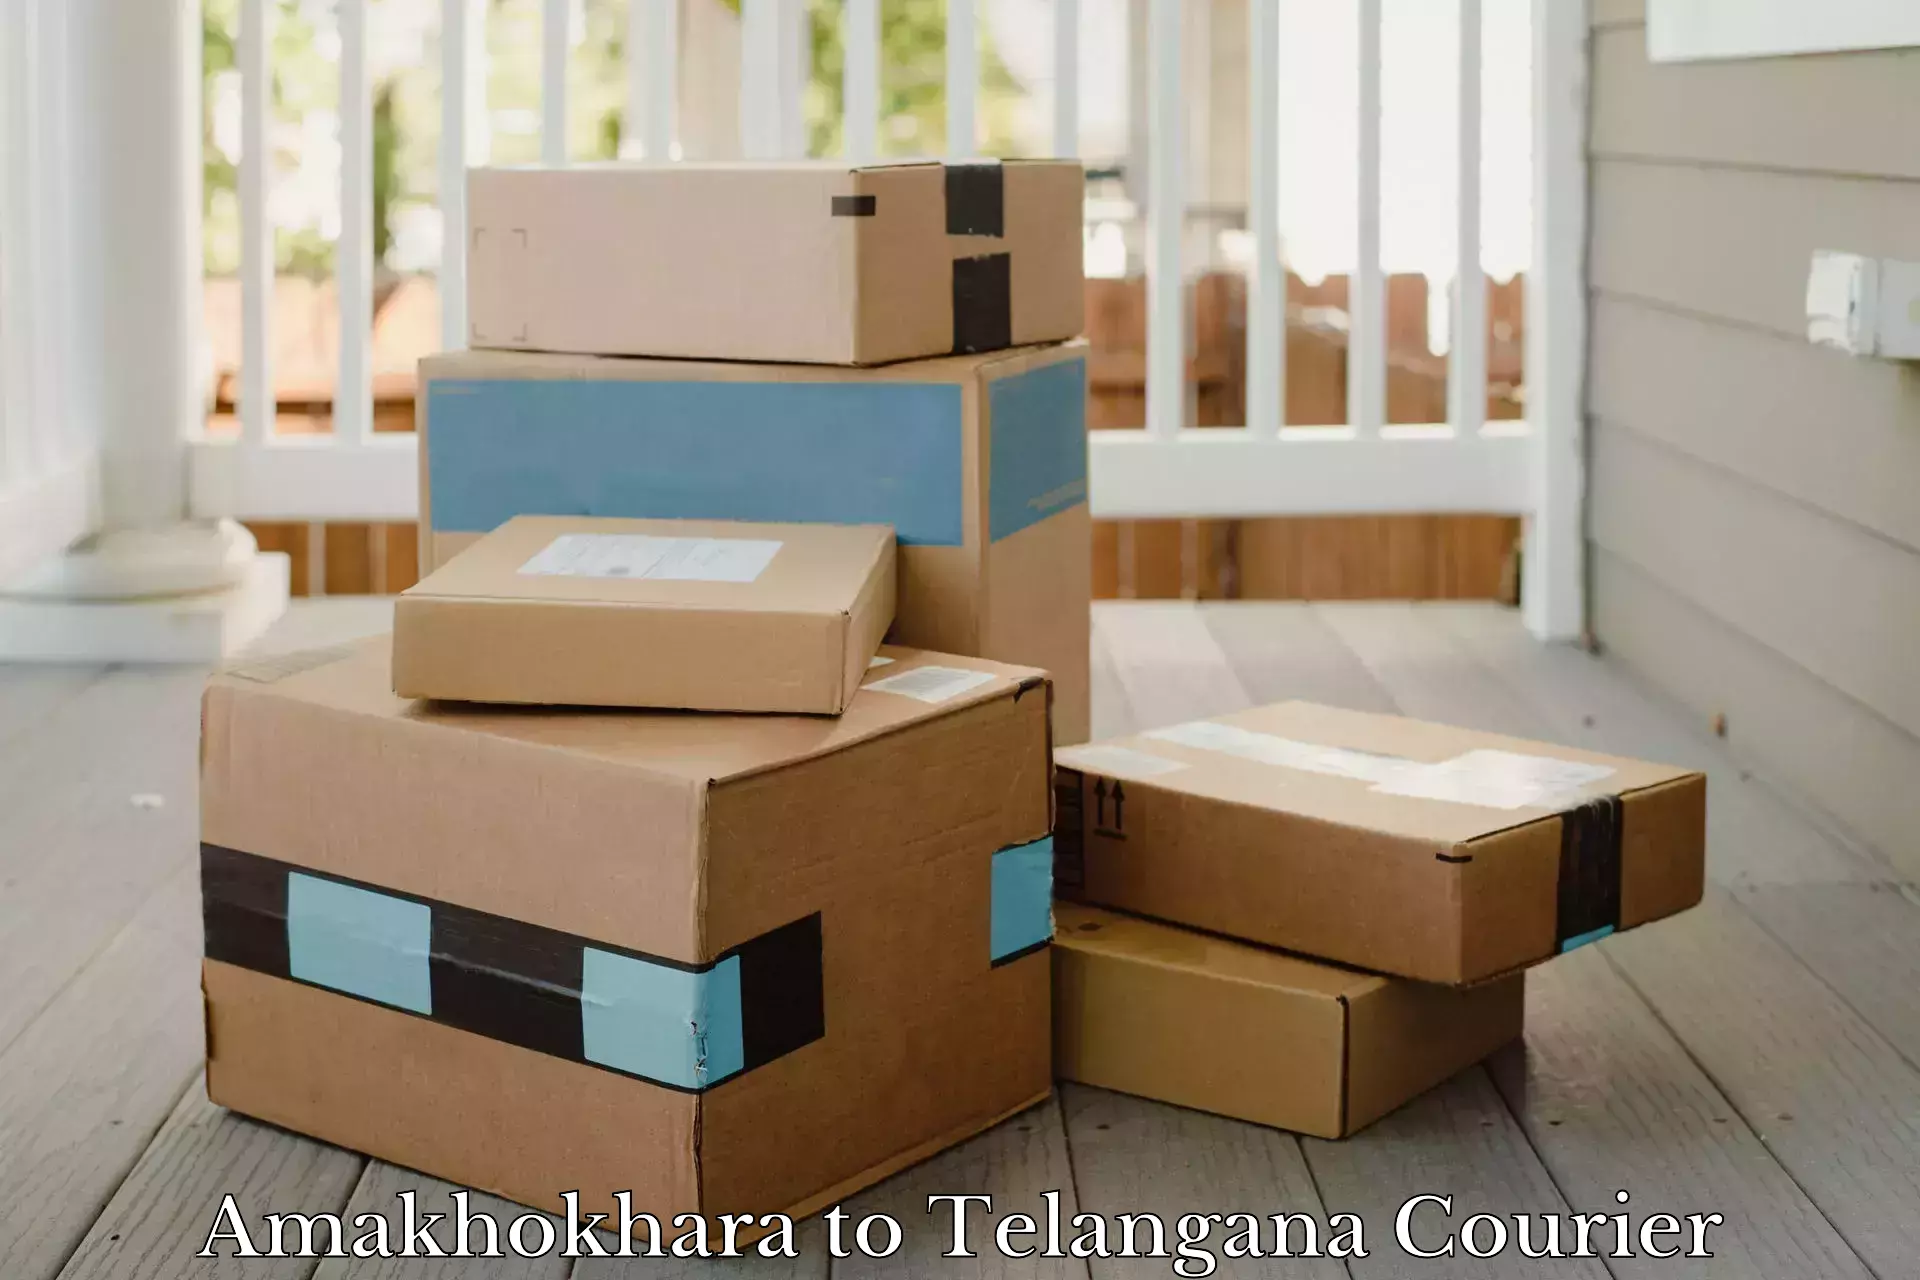 Quality courier services in Amakhokhara to Narmetta